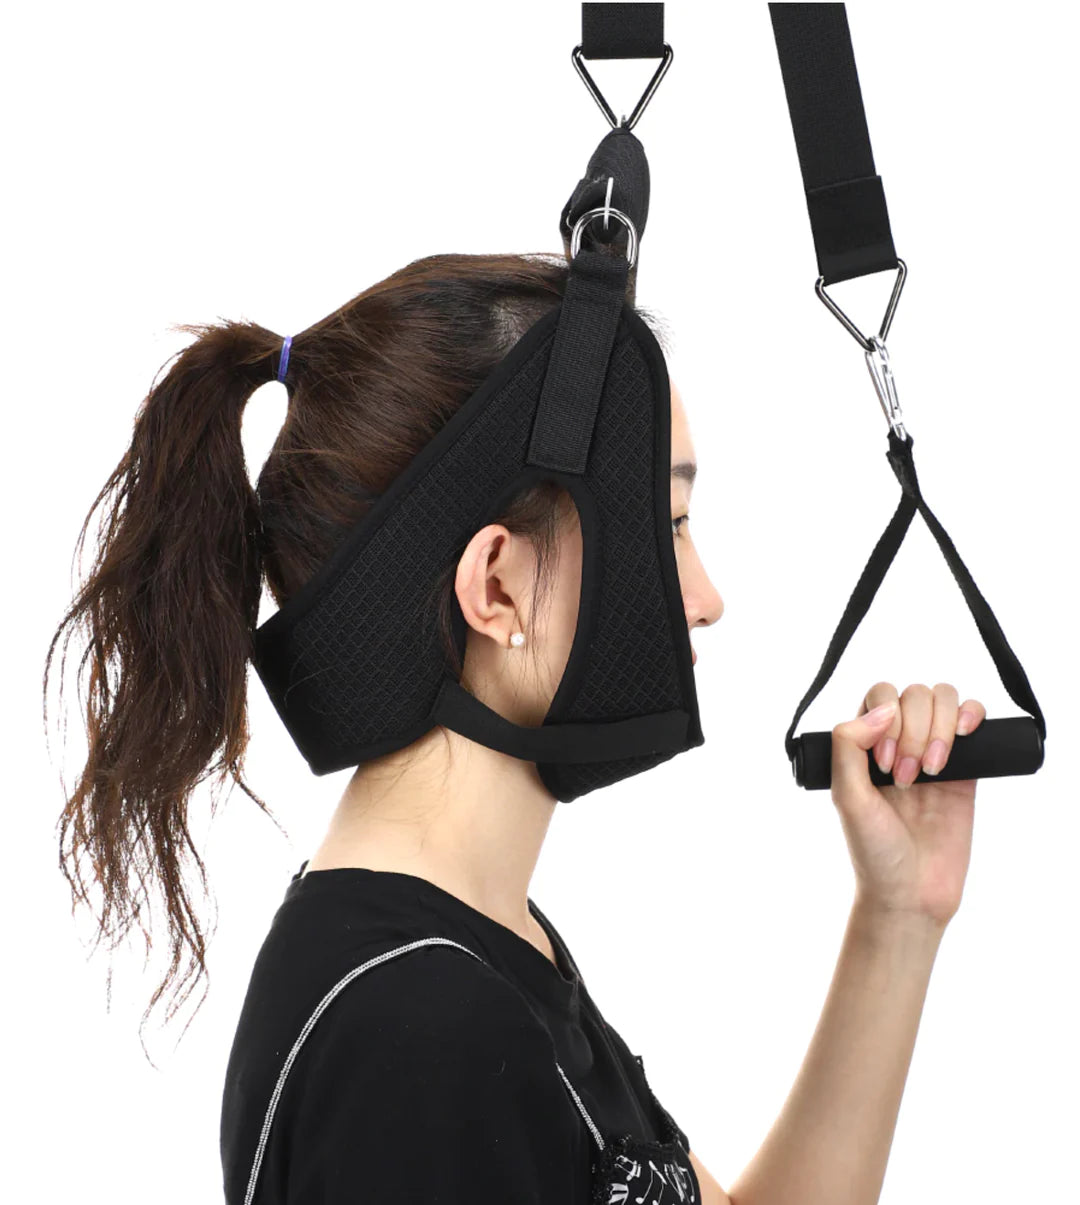 Mrjoint™ Cervical Traction Neck Stretcher